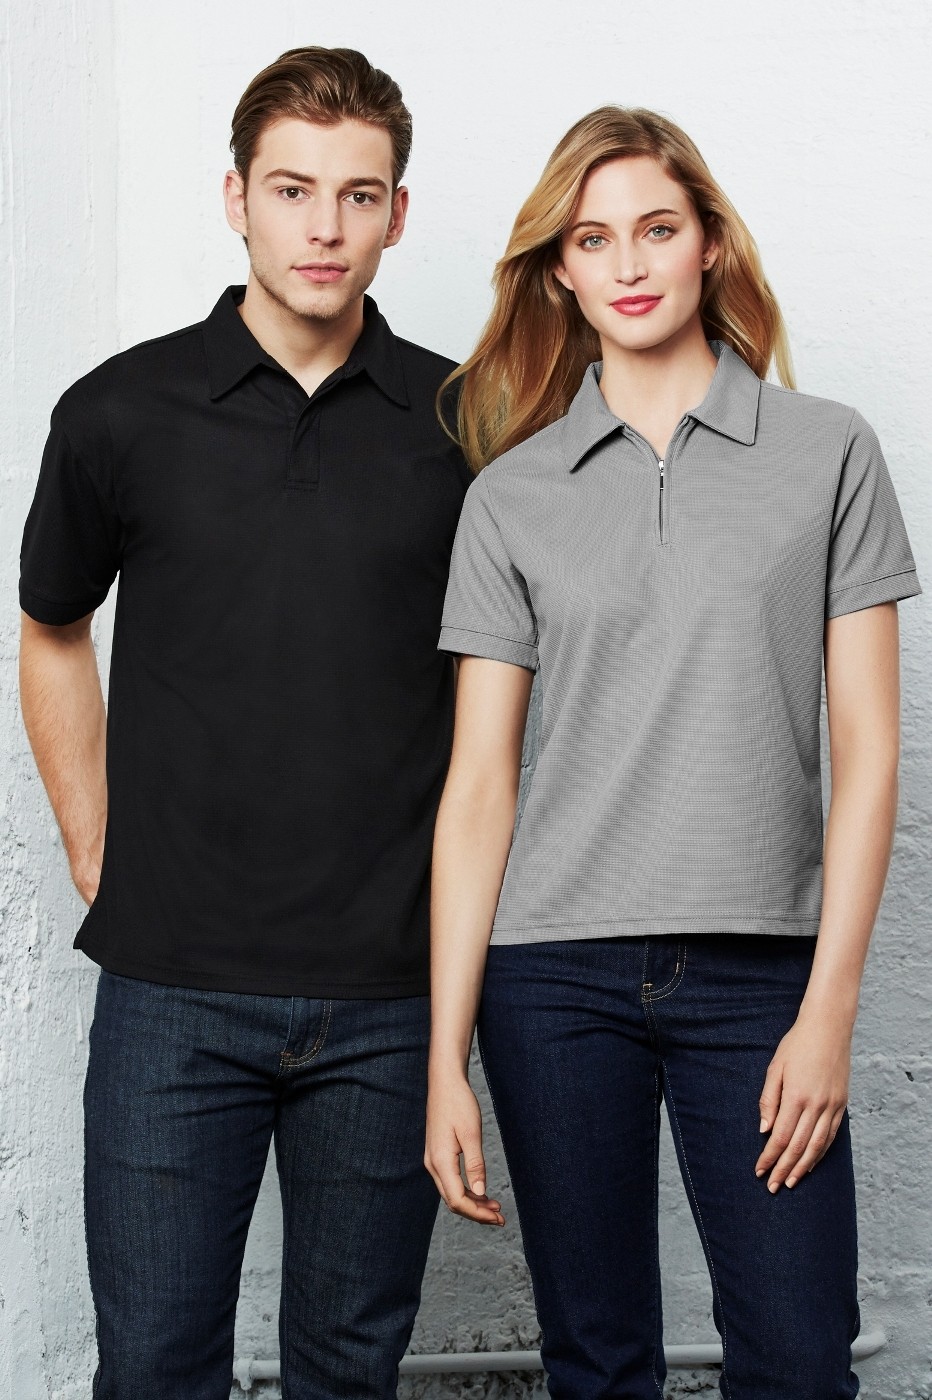 Polo shirt for Unisex